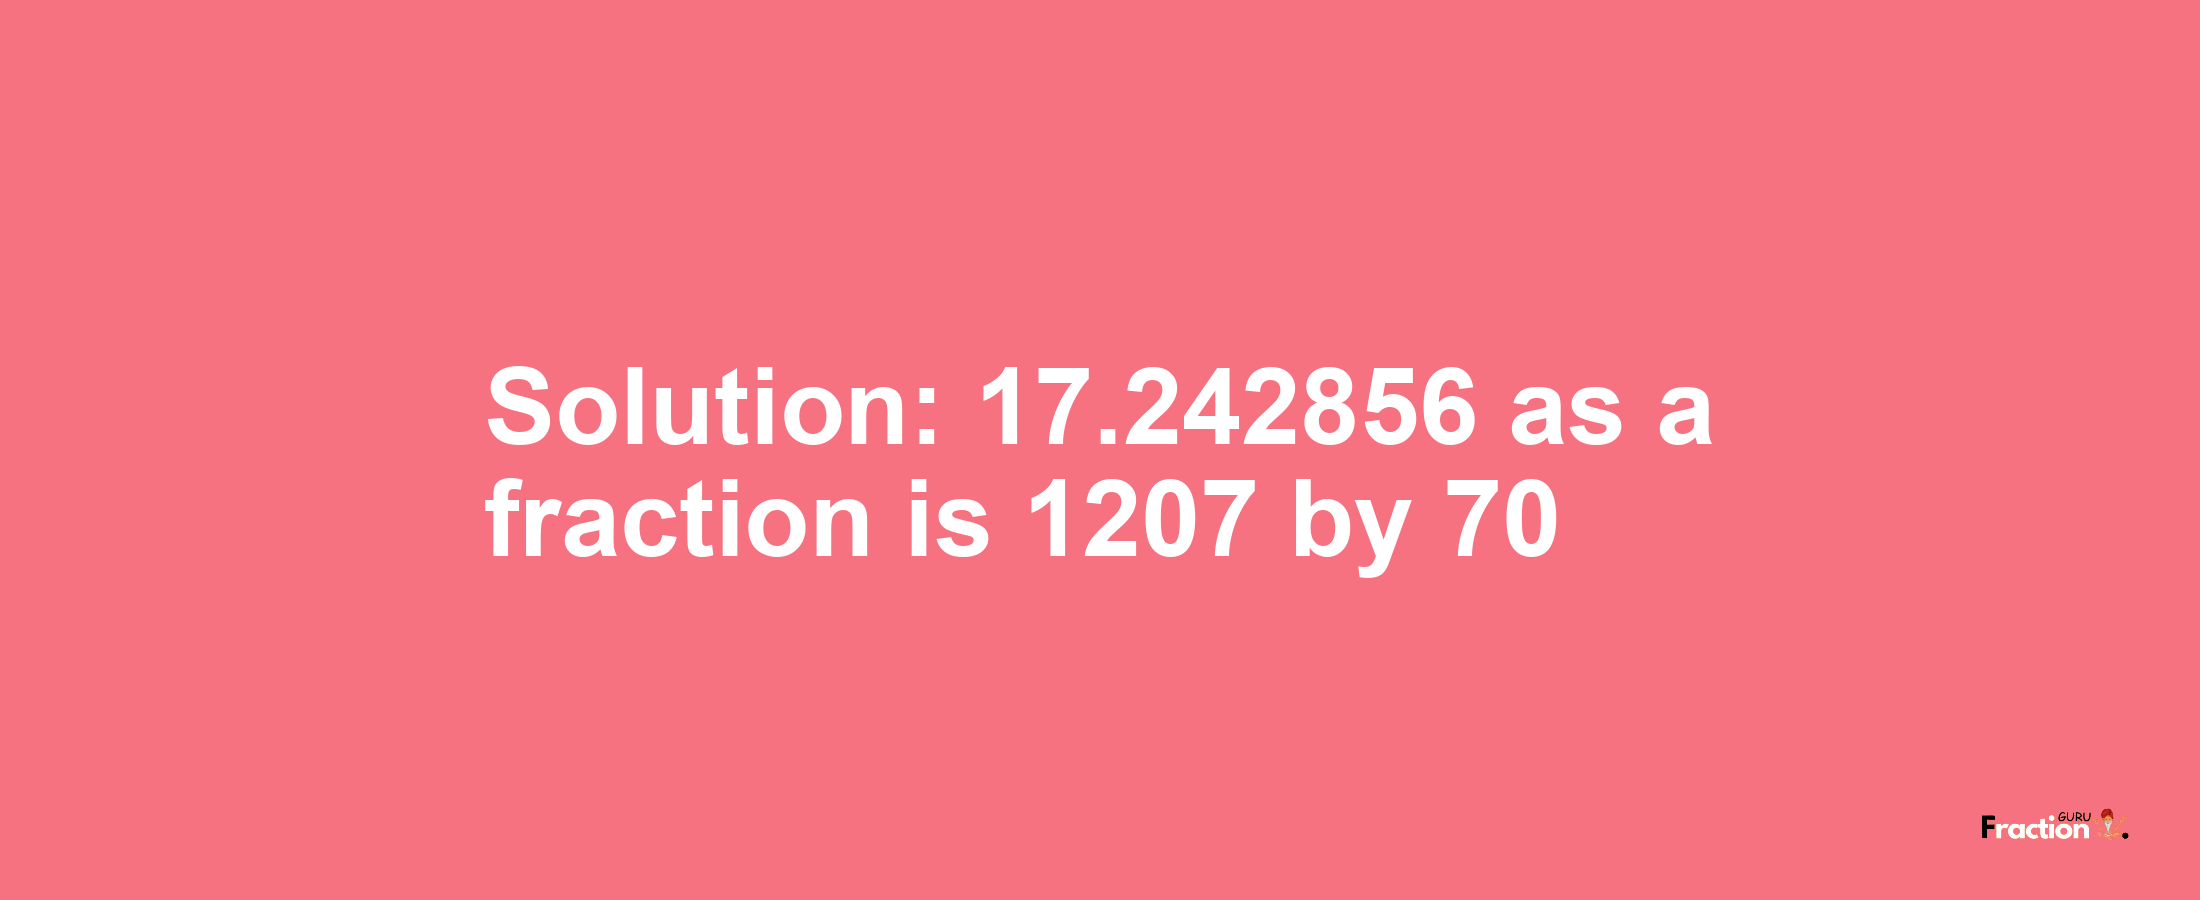 Solution:17.242856 as a fraction is 1207/70